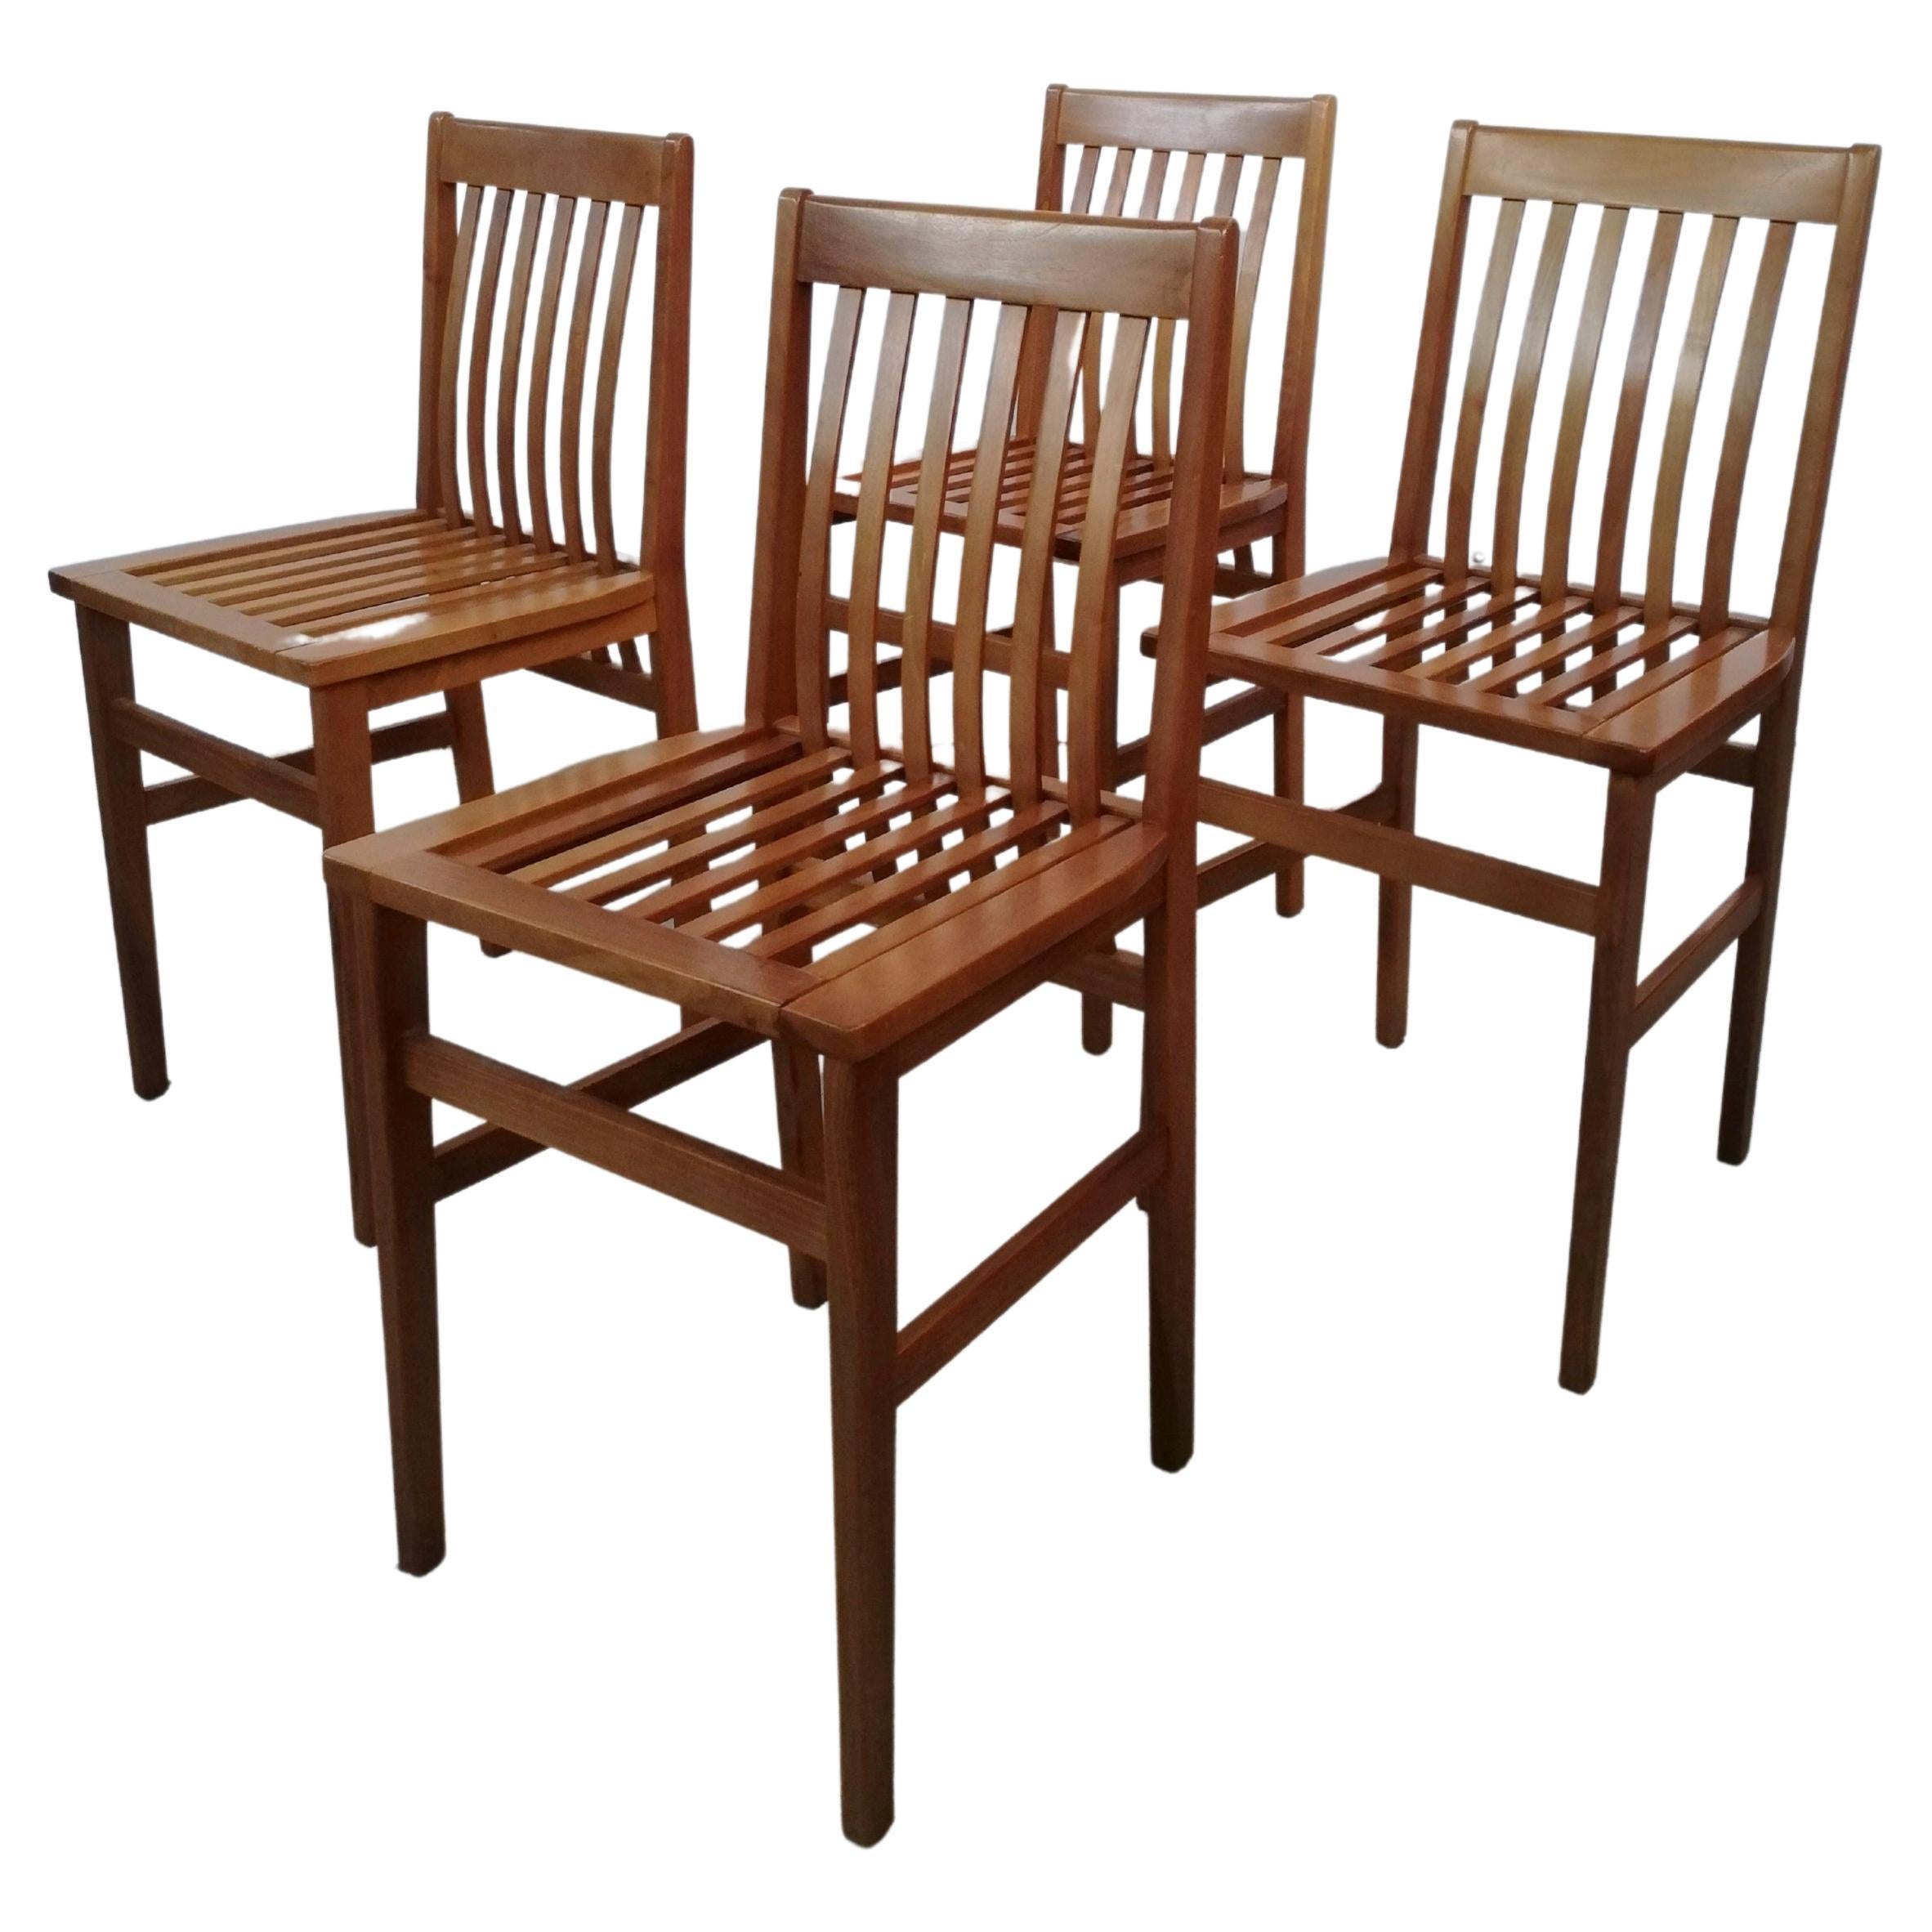 Set of 4 Solid Wood "Milano" Chairs Designed by Aldo Rossi for Molteni